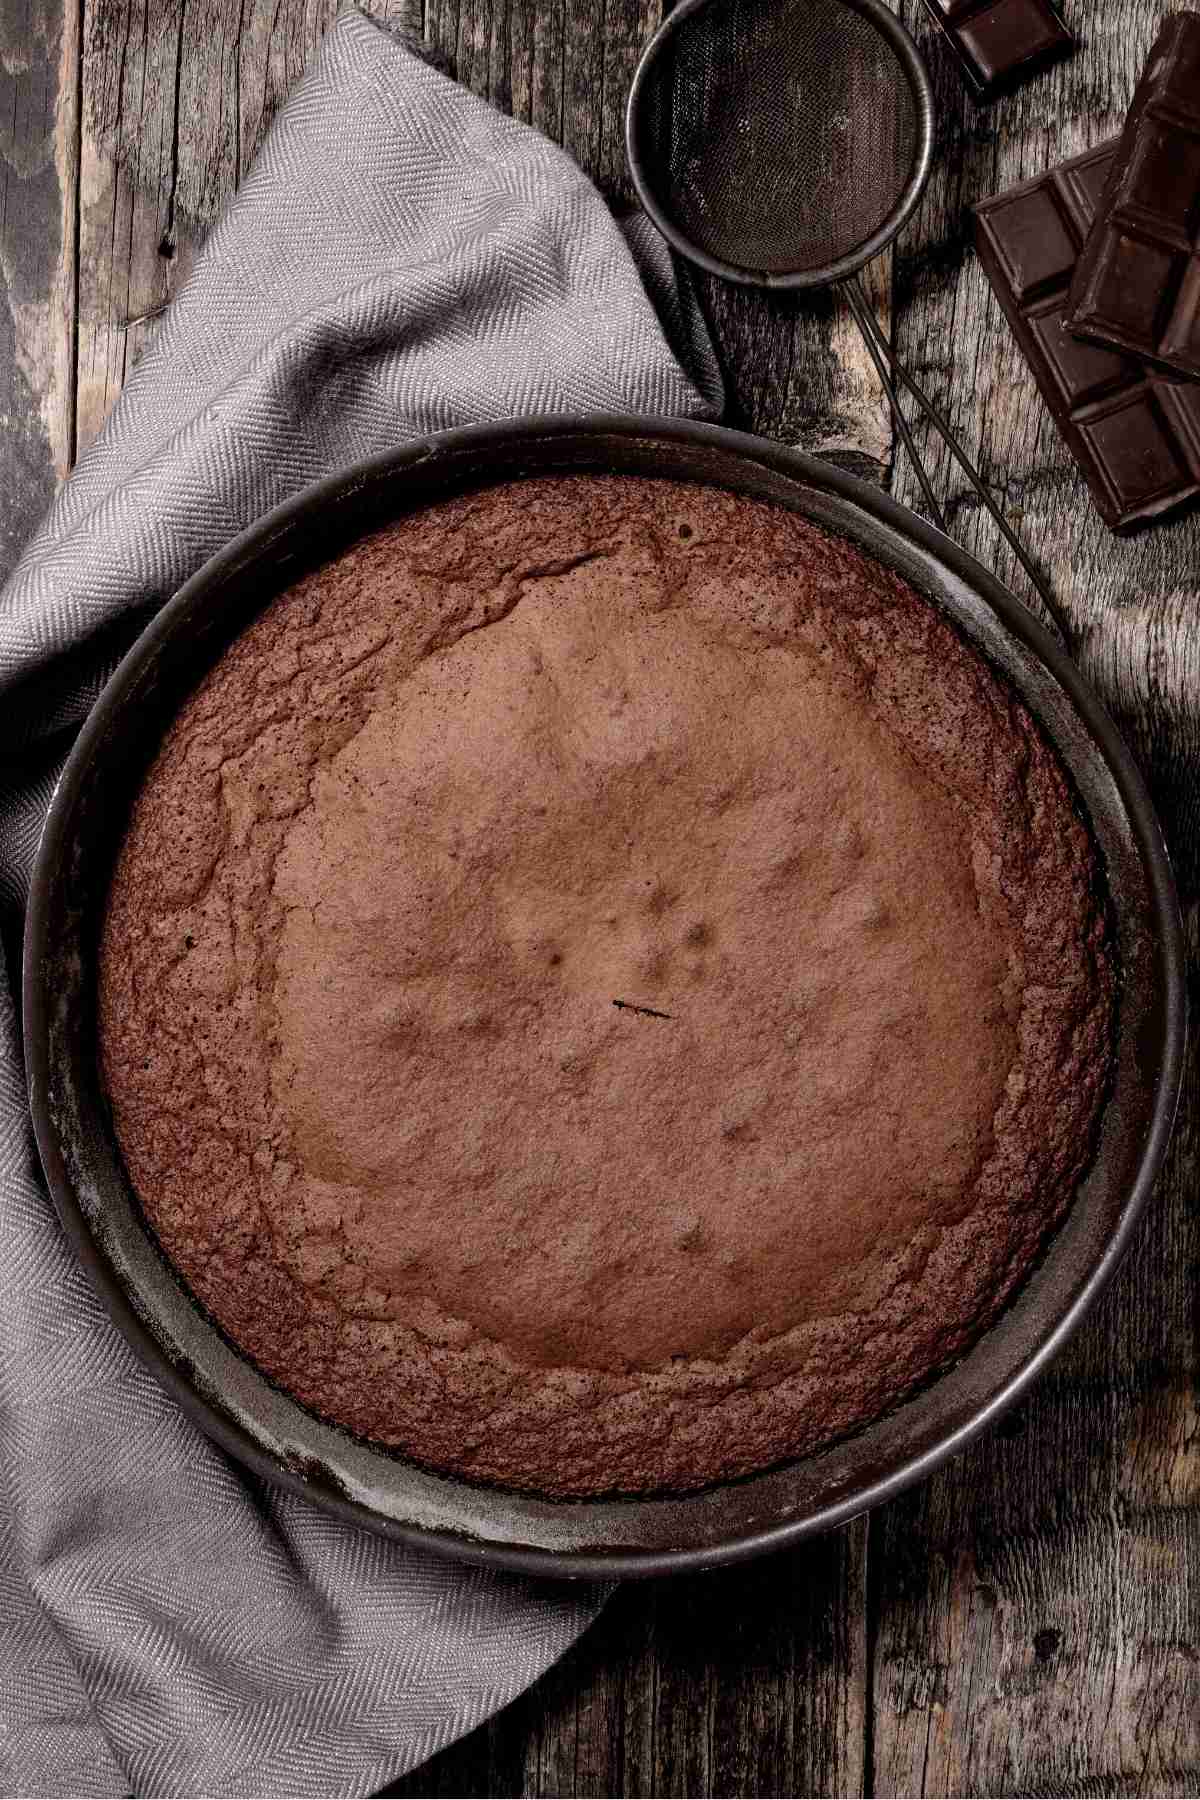 Chocolate cake never disappoints. It’s a welcome addition to birthdays, holiday meals, and family celebrations. This chocolate cake is made without buttermilk and bakes up perfectly moist and tender.